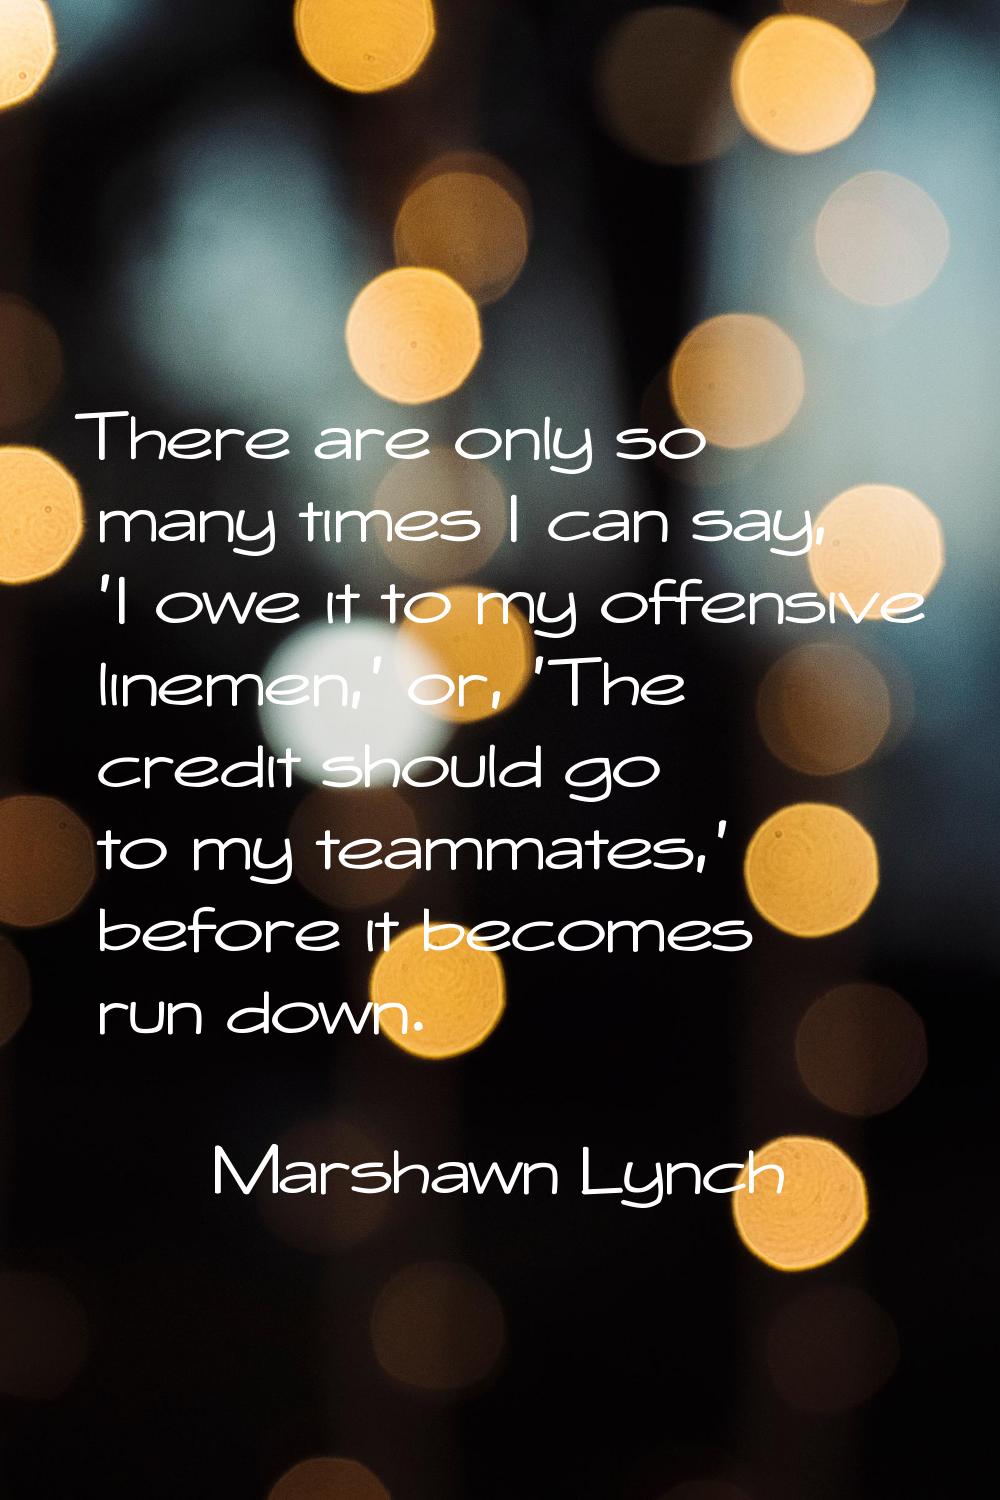 There are only so many times I can say, 'I owe it to my offensive linemen,' or, 'The credit should 